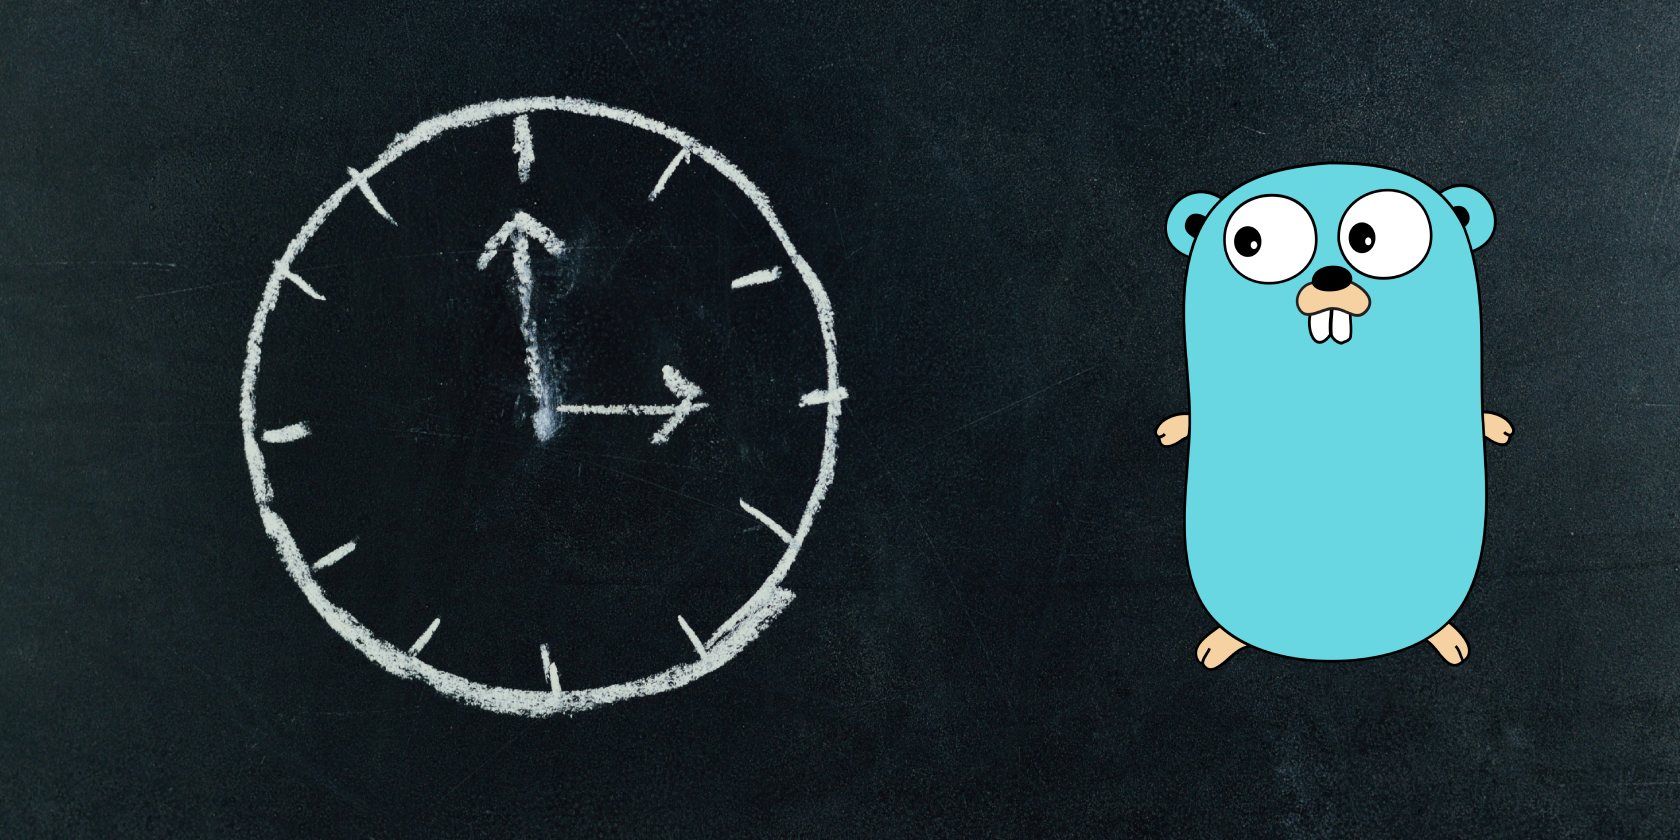 Golang's gopher mascot and a clock drawn with chalk